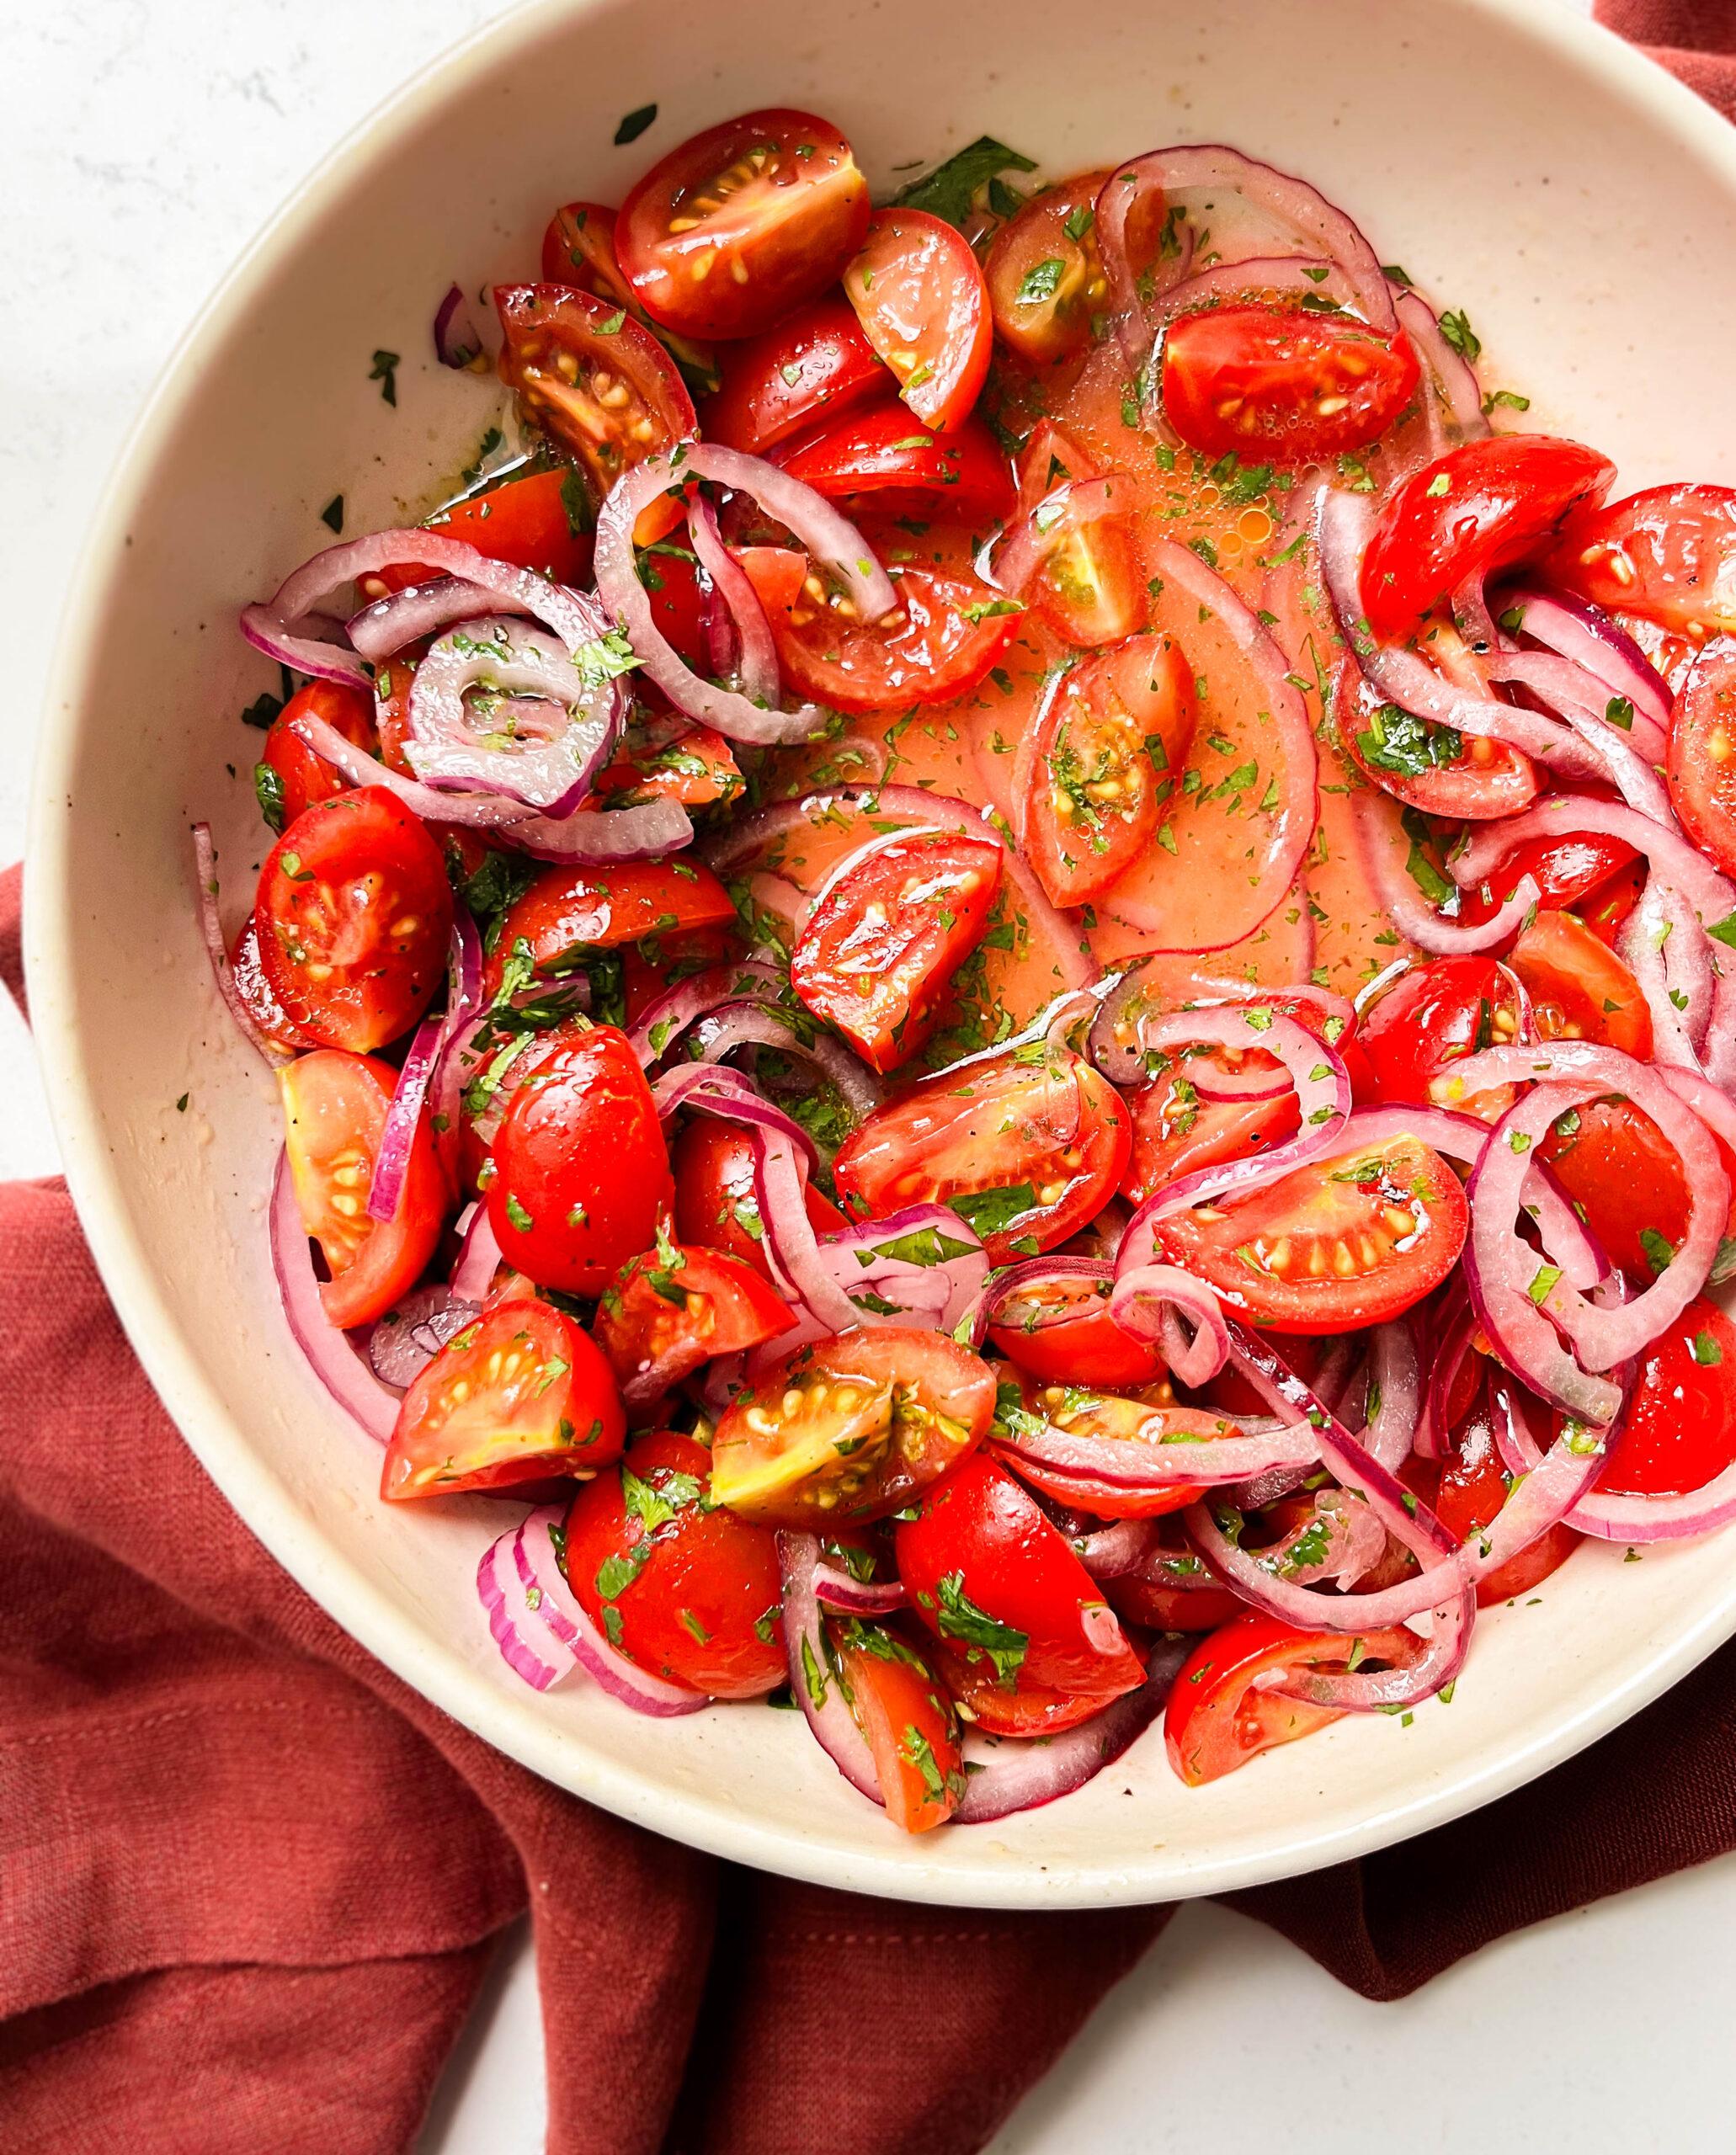 bowl of tomato salad on a red cloth